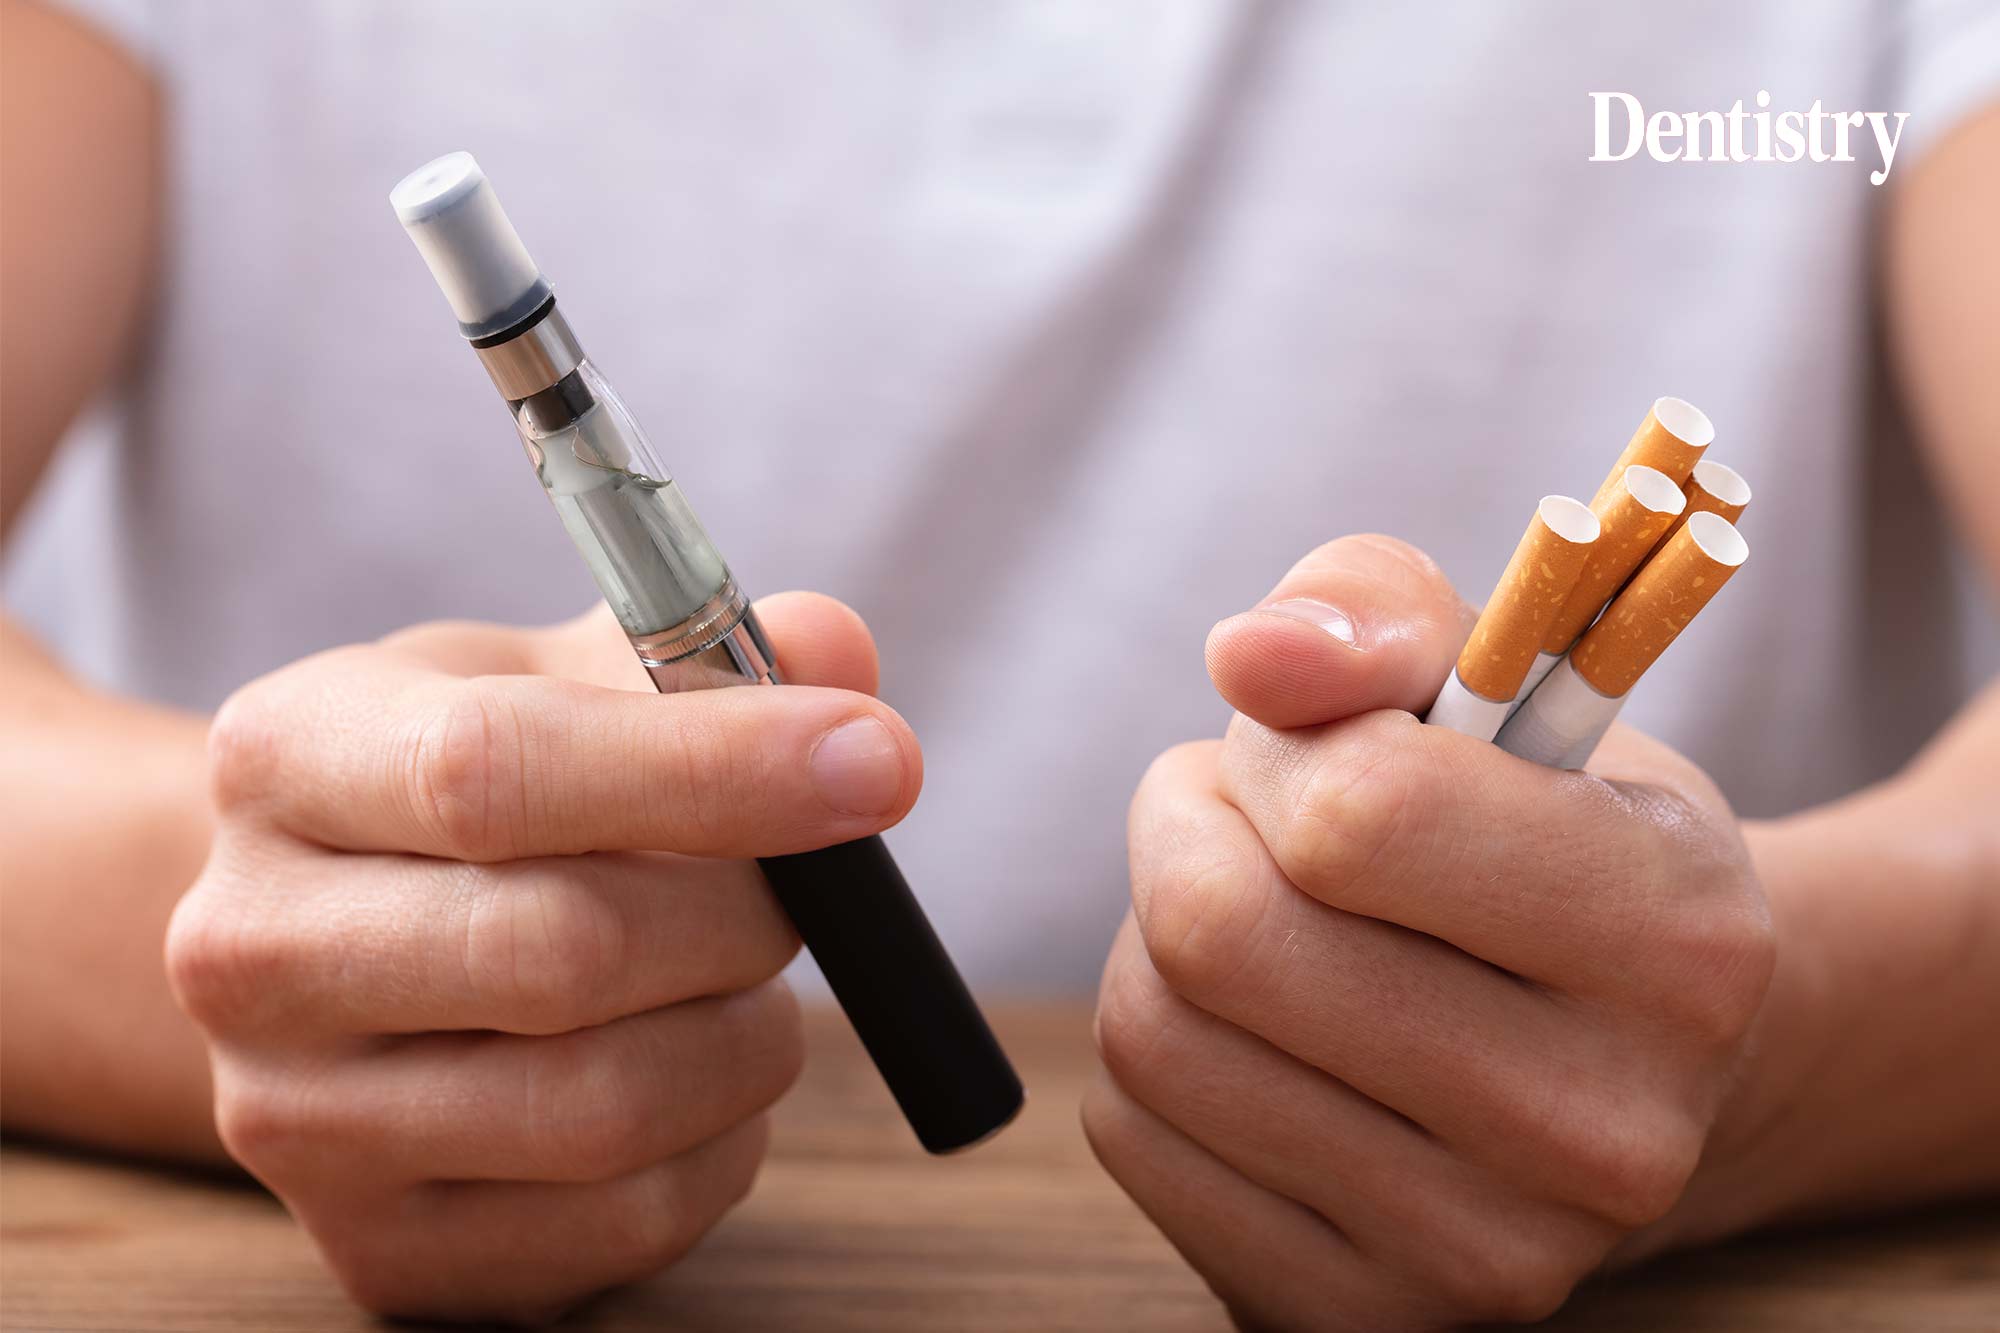 Vapes '95% safer' than cigarettes messaging was unwise, says health expert